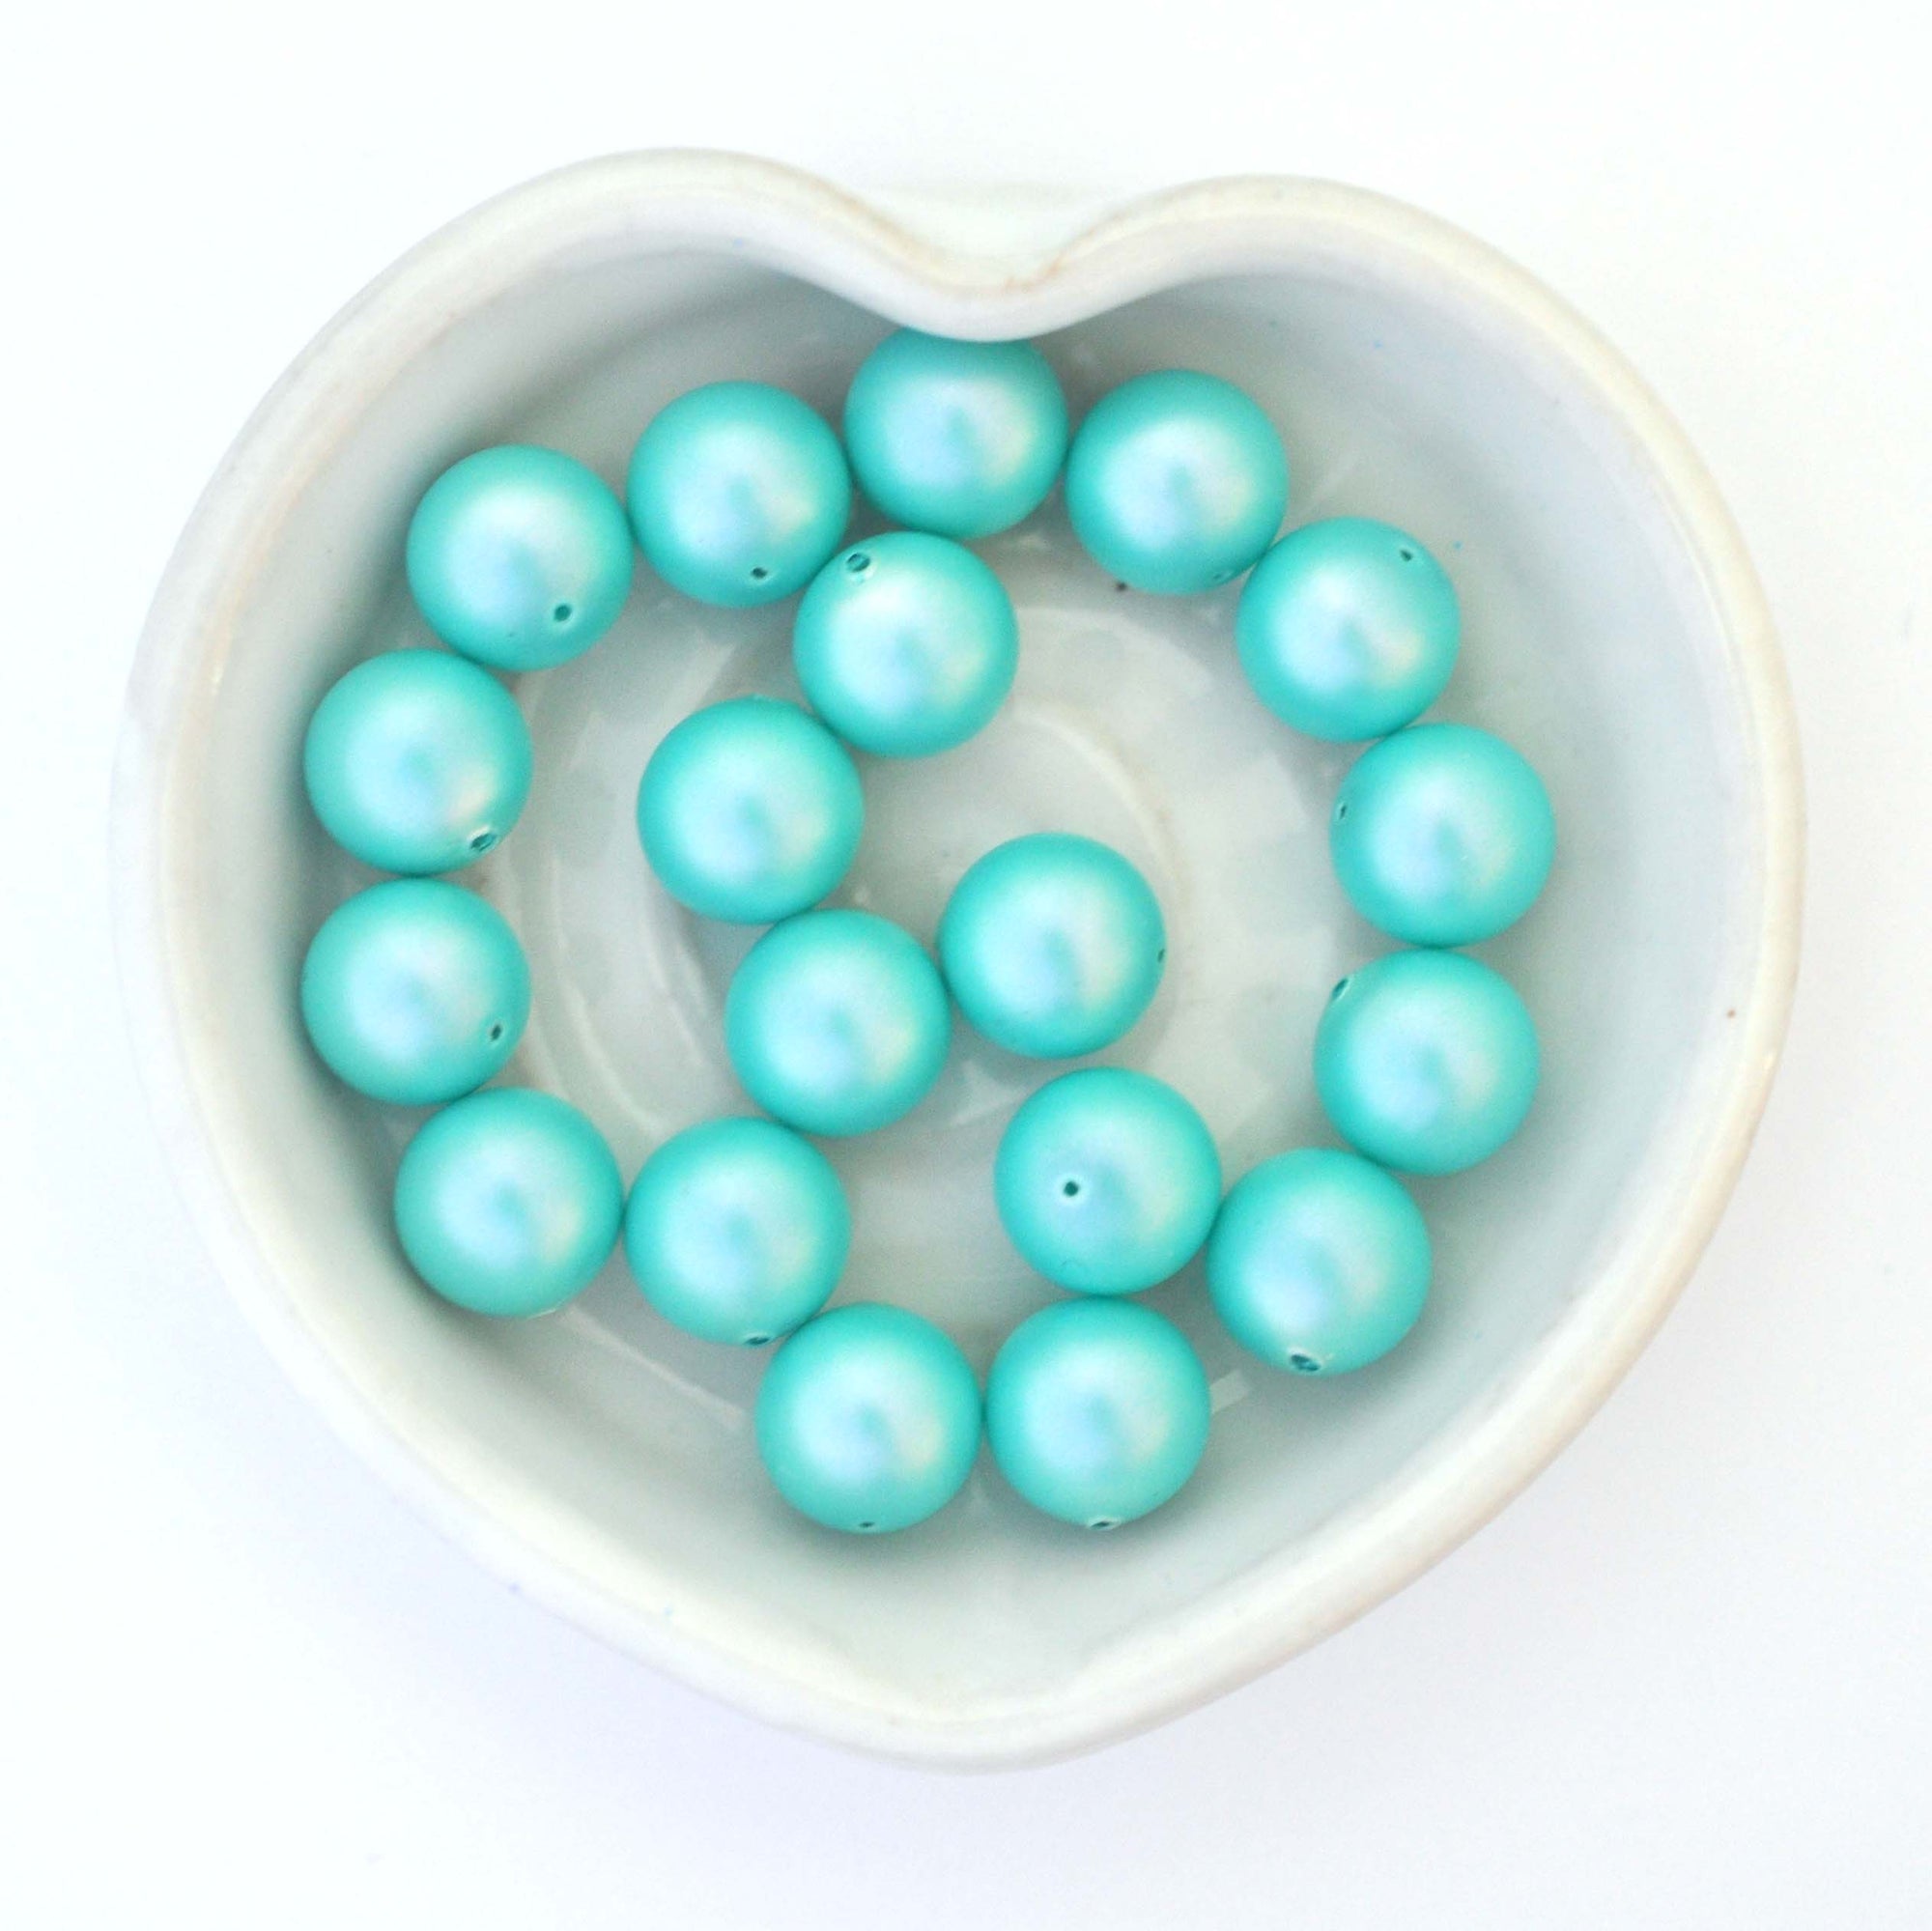 Iridescent Light Turquoise 5810 Barton Crystal Round Pearl Beads 10mm